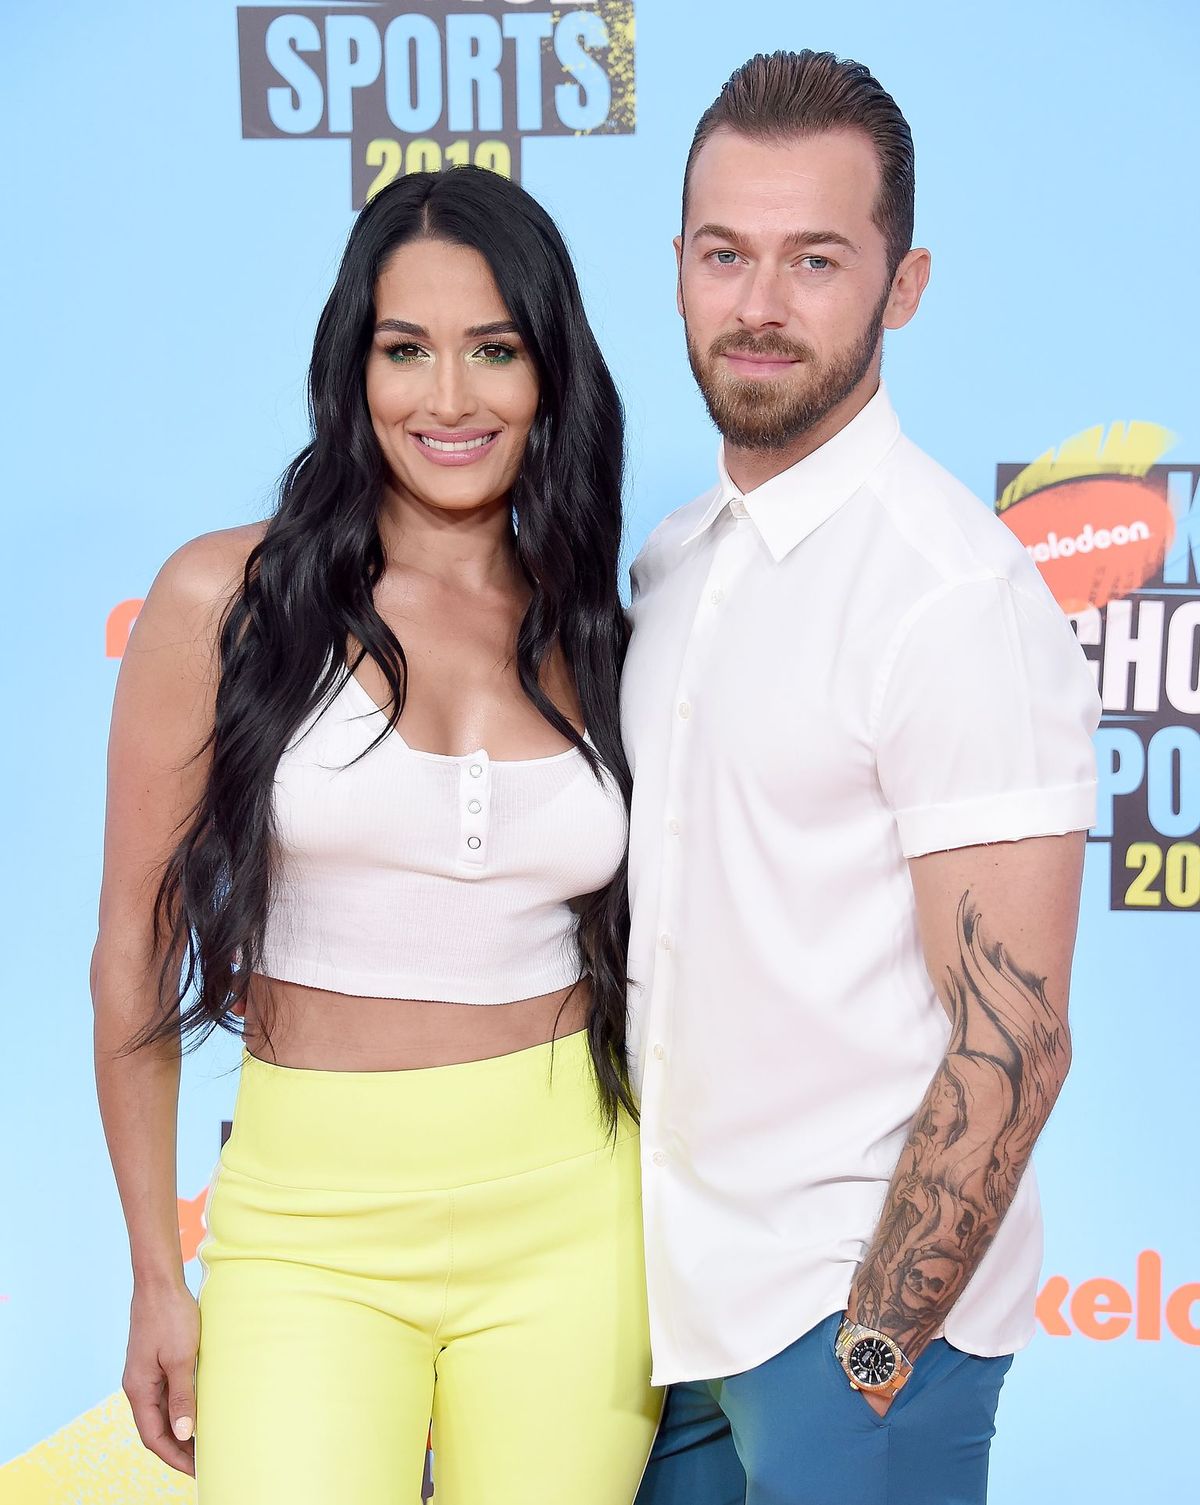 Nikki Bella and Artem Chigvintsev at the Nickelodeon Kids' Choice Sports 2019 at Barker Hangar on July 11, 2019 in Santa Monica, California | Photo: Getty Images